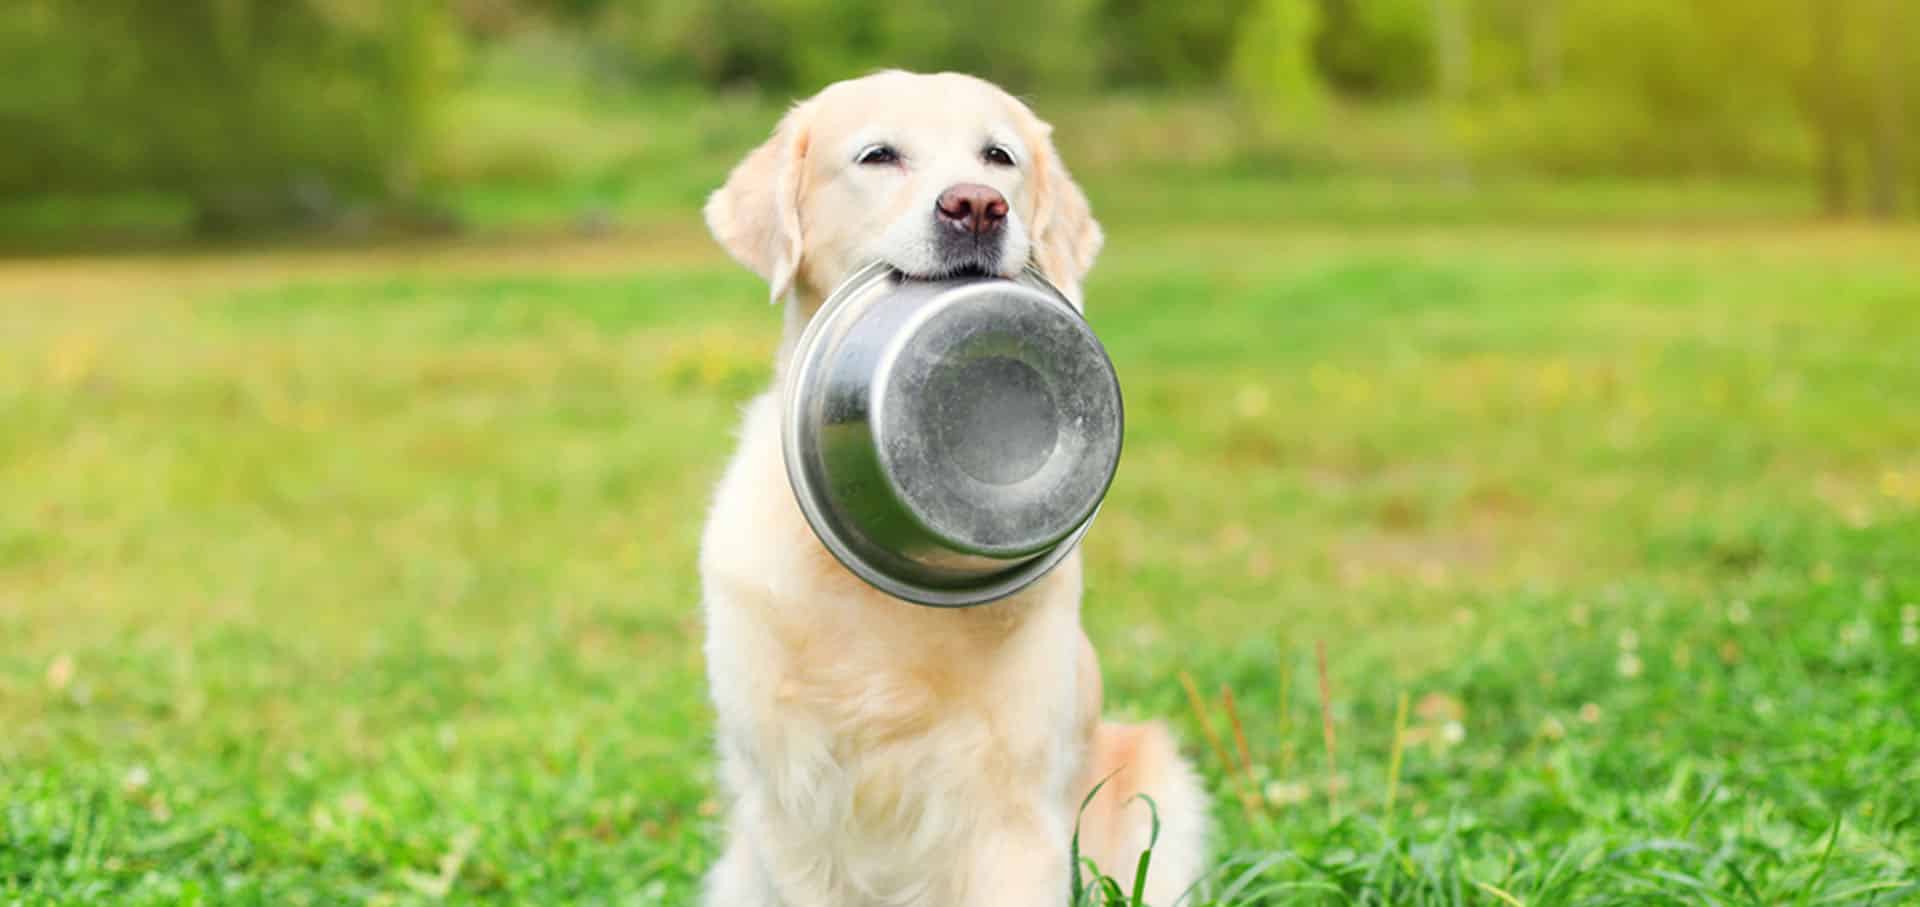 Golden retriever holding a bowl in its mouth — Best Veterinary Services in Bundaberg, QLD